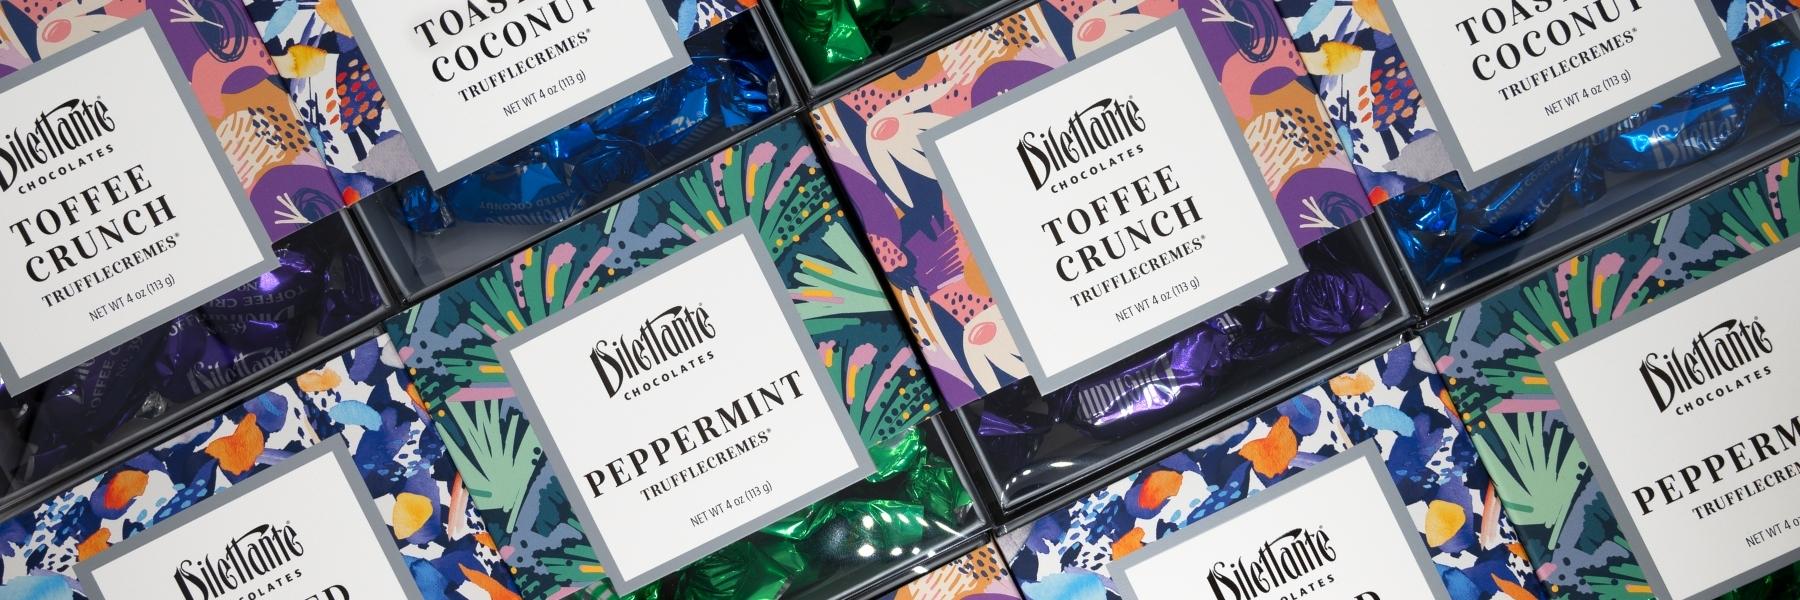 Dilettante Chocolates New Spring Gift Boxes Featuring Toffee Crunch, Peppermint, and Toasted Coconut Candies